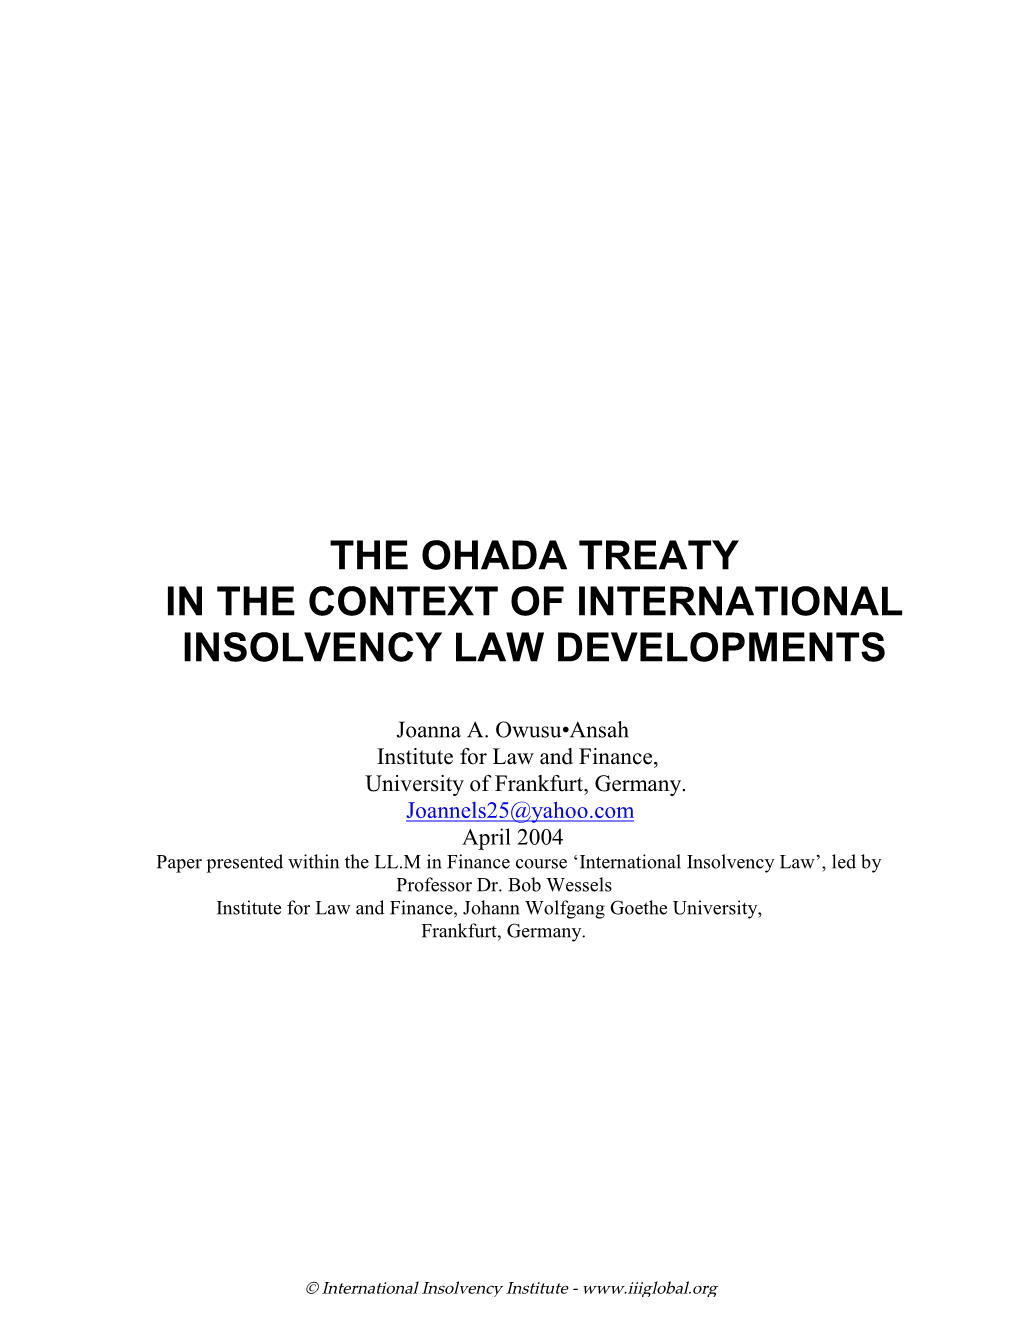 The Ohada Treaty in the Context of International Insolvency Law Developments